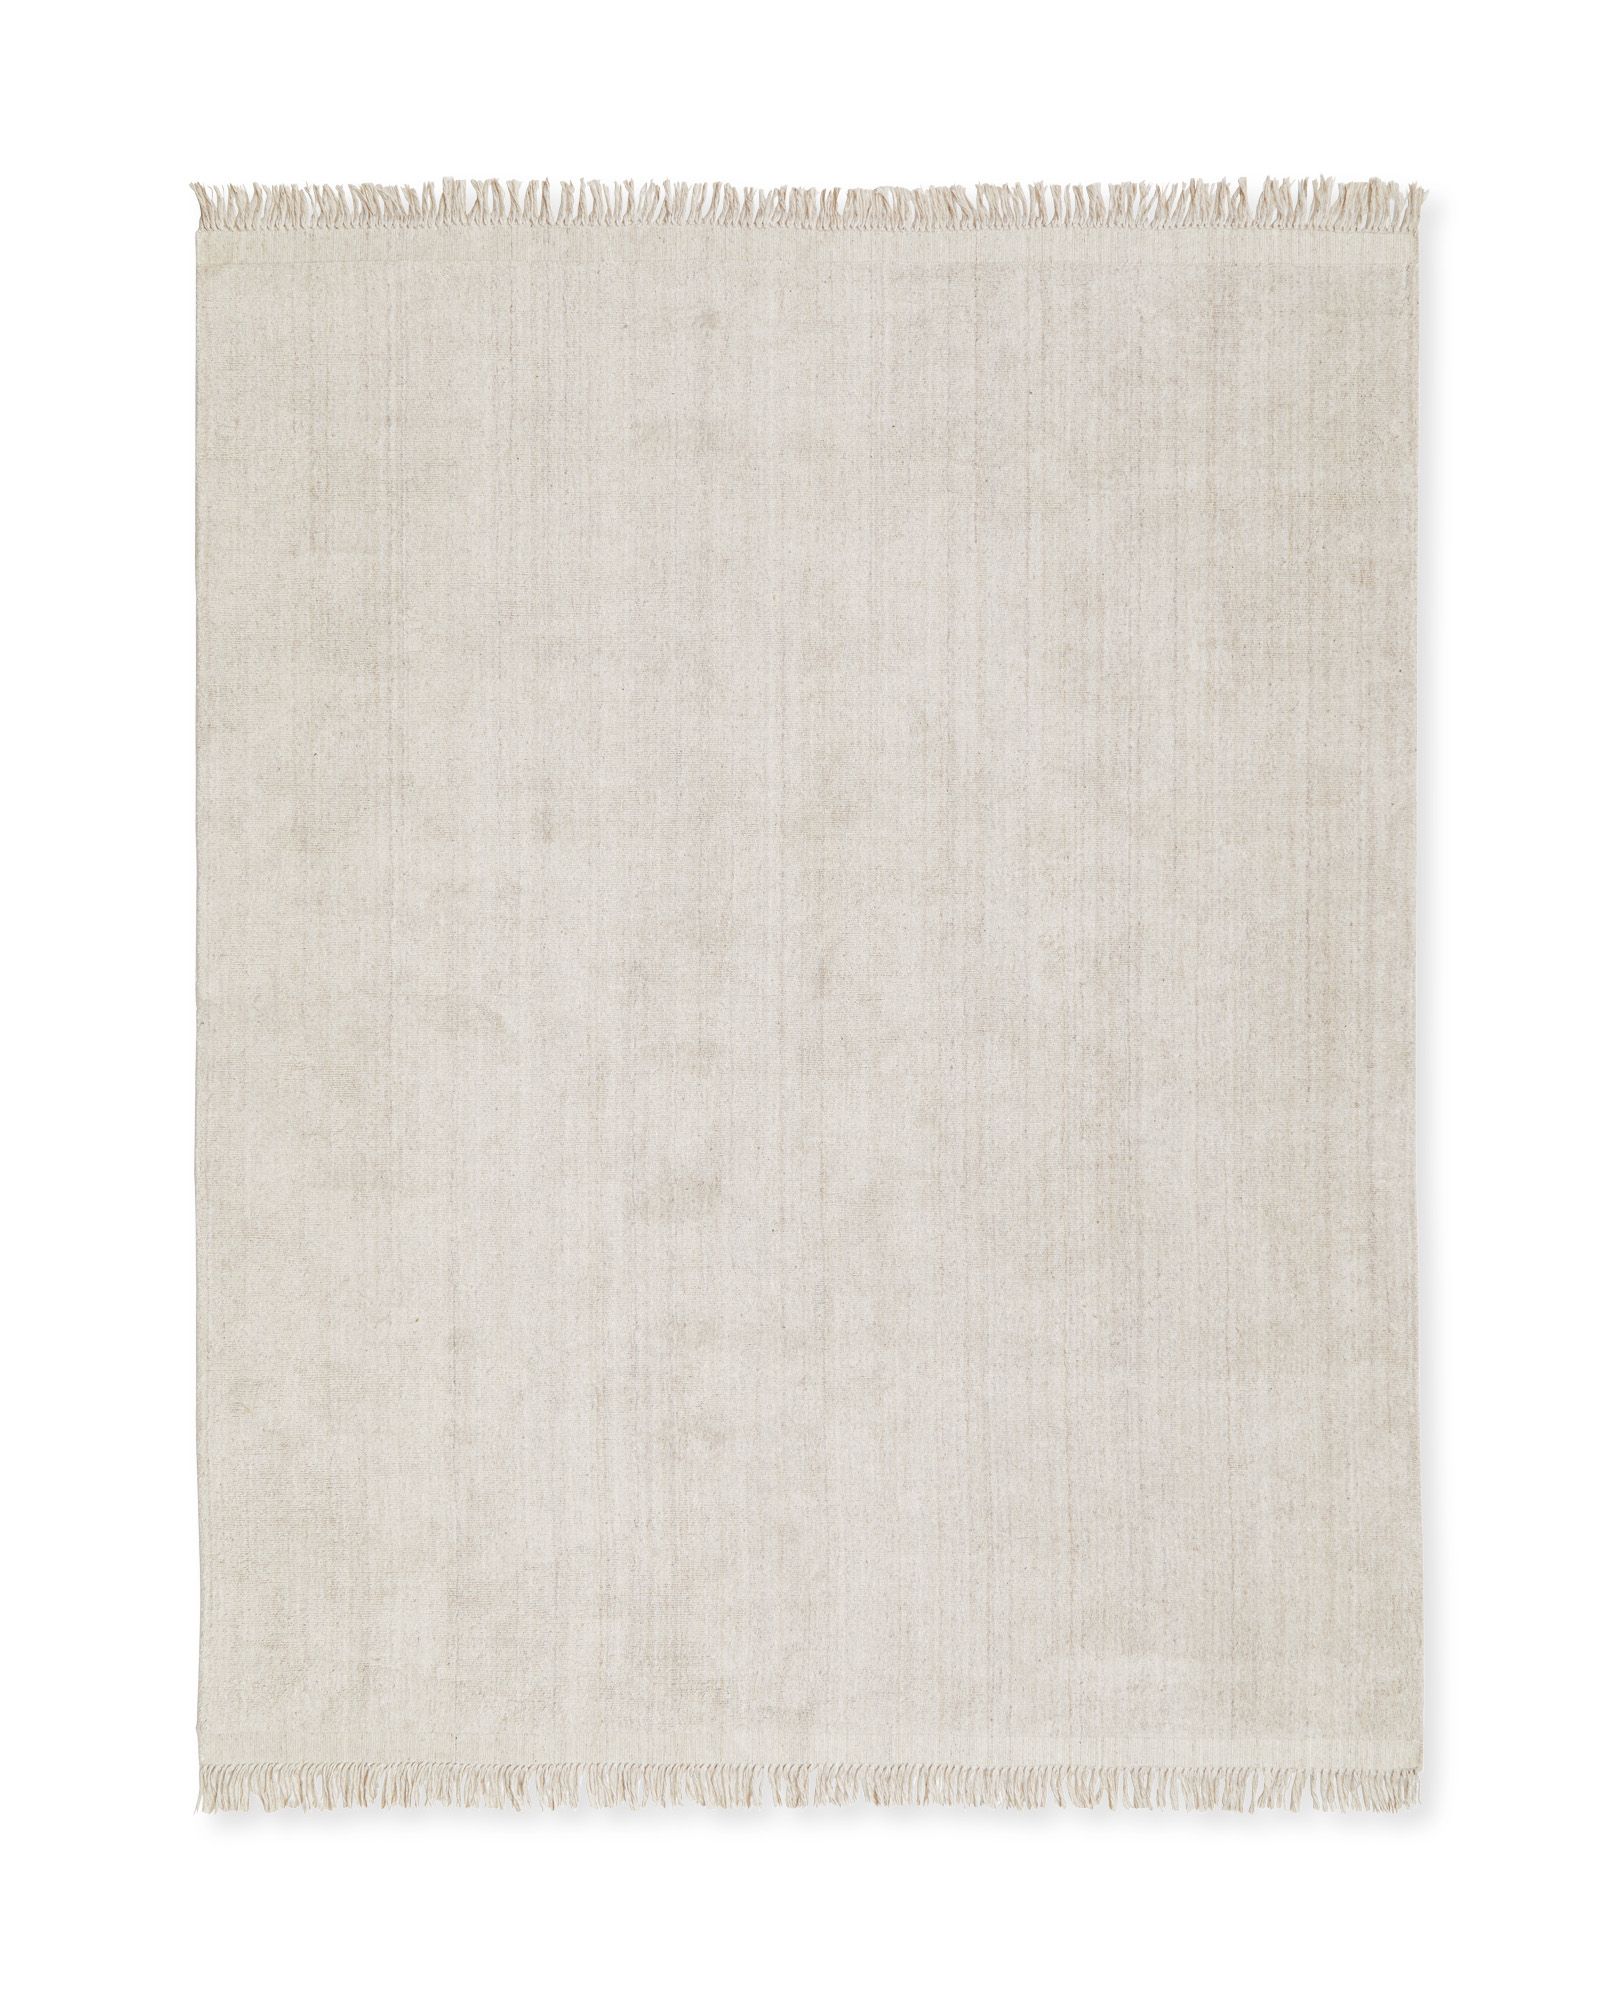 Belmond Rug | Serena and Lily